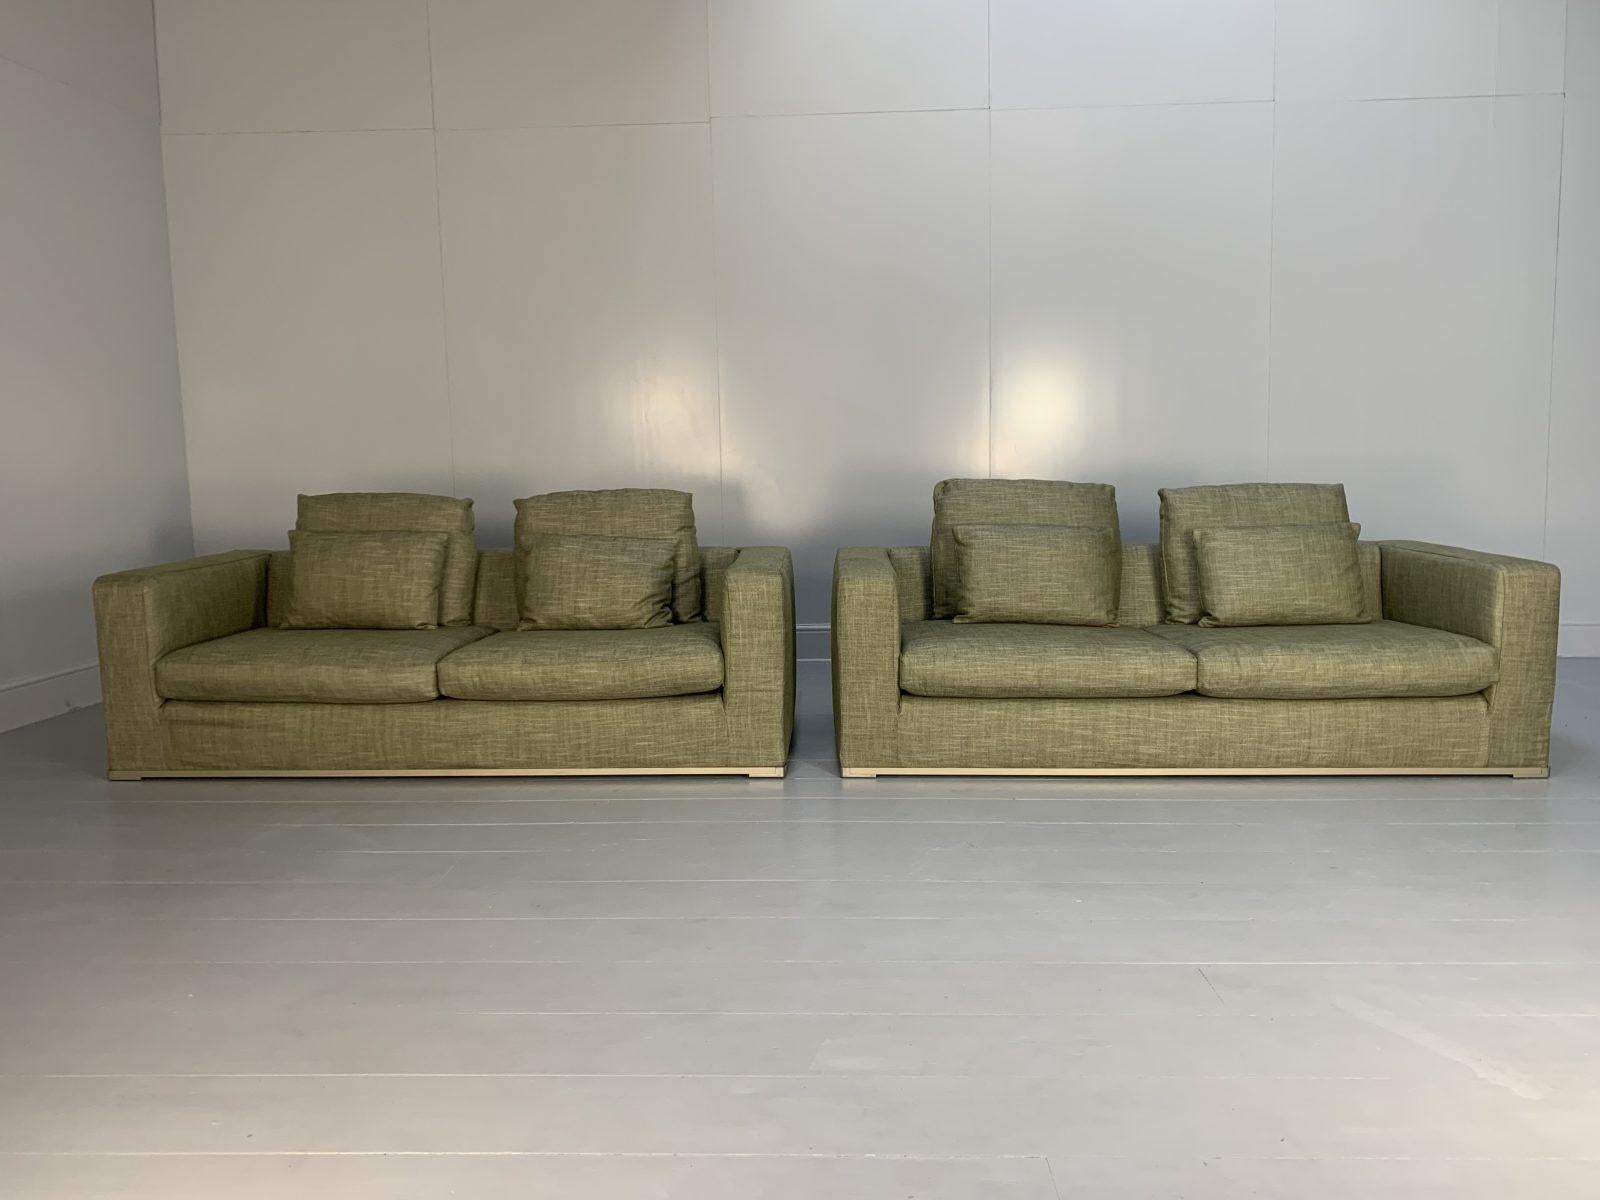 Pair of B&B Italia “Omnia” Sofas, 2.5-Seat, in Pale Green Linen For Sale 6